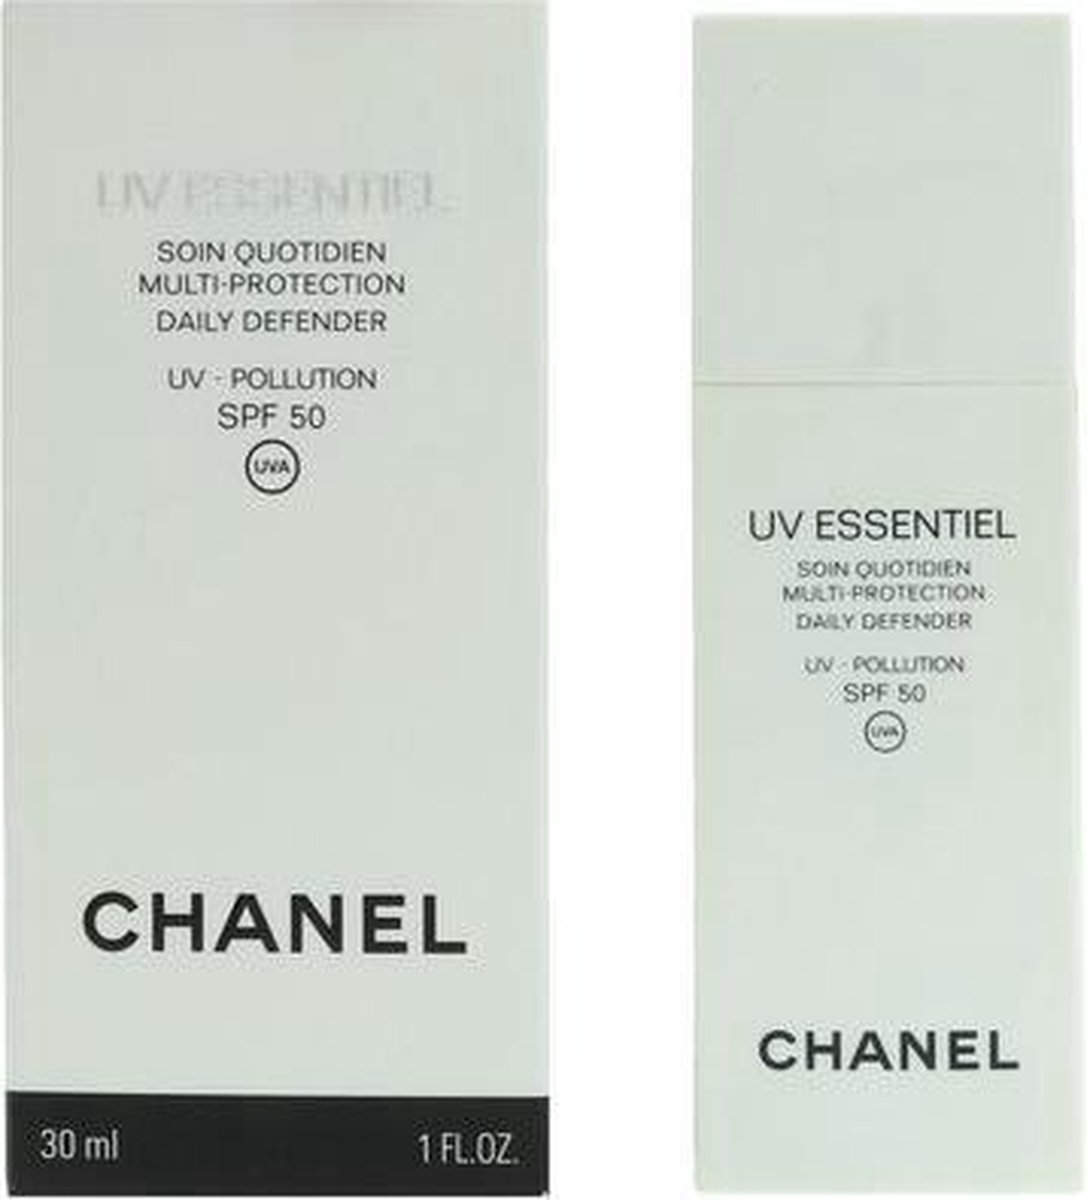 Chanel UV products for daily skin care